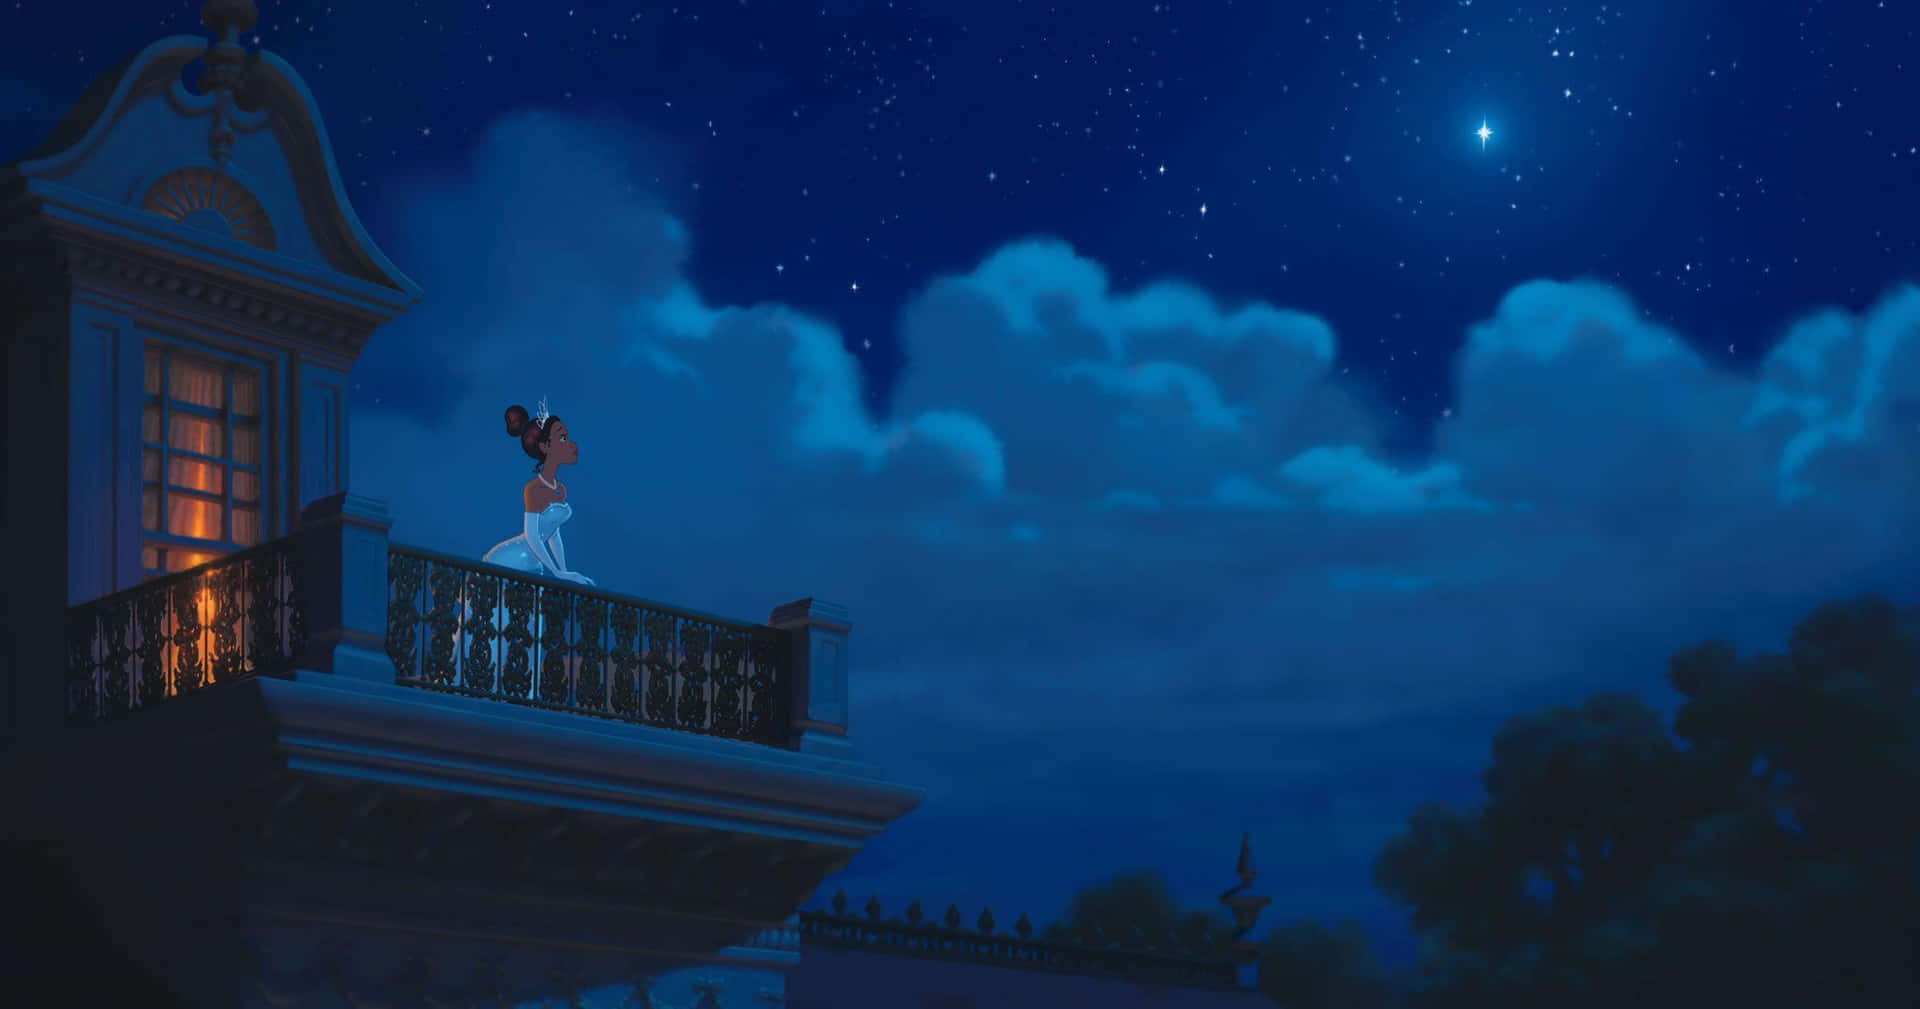 "Princess Tiana living out her happily ever after!" Wallpaper